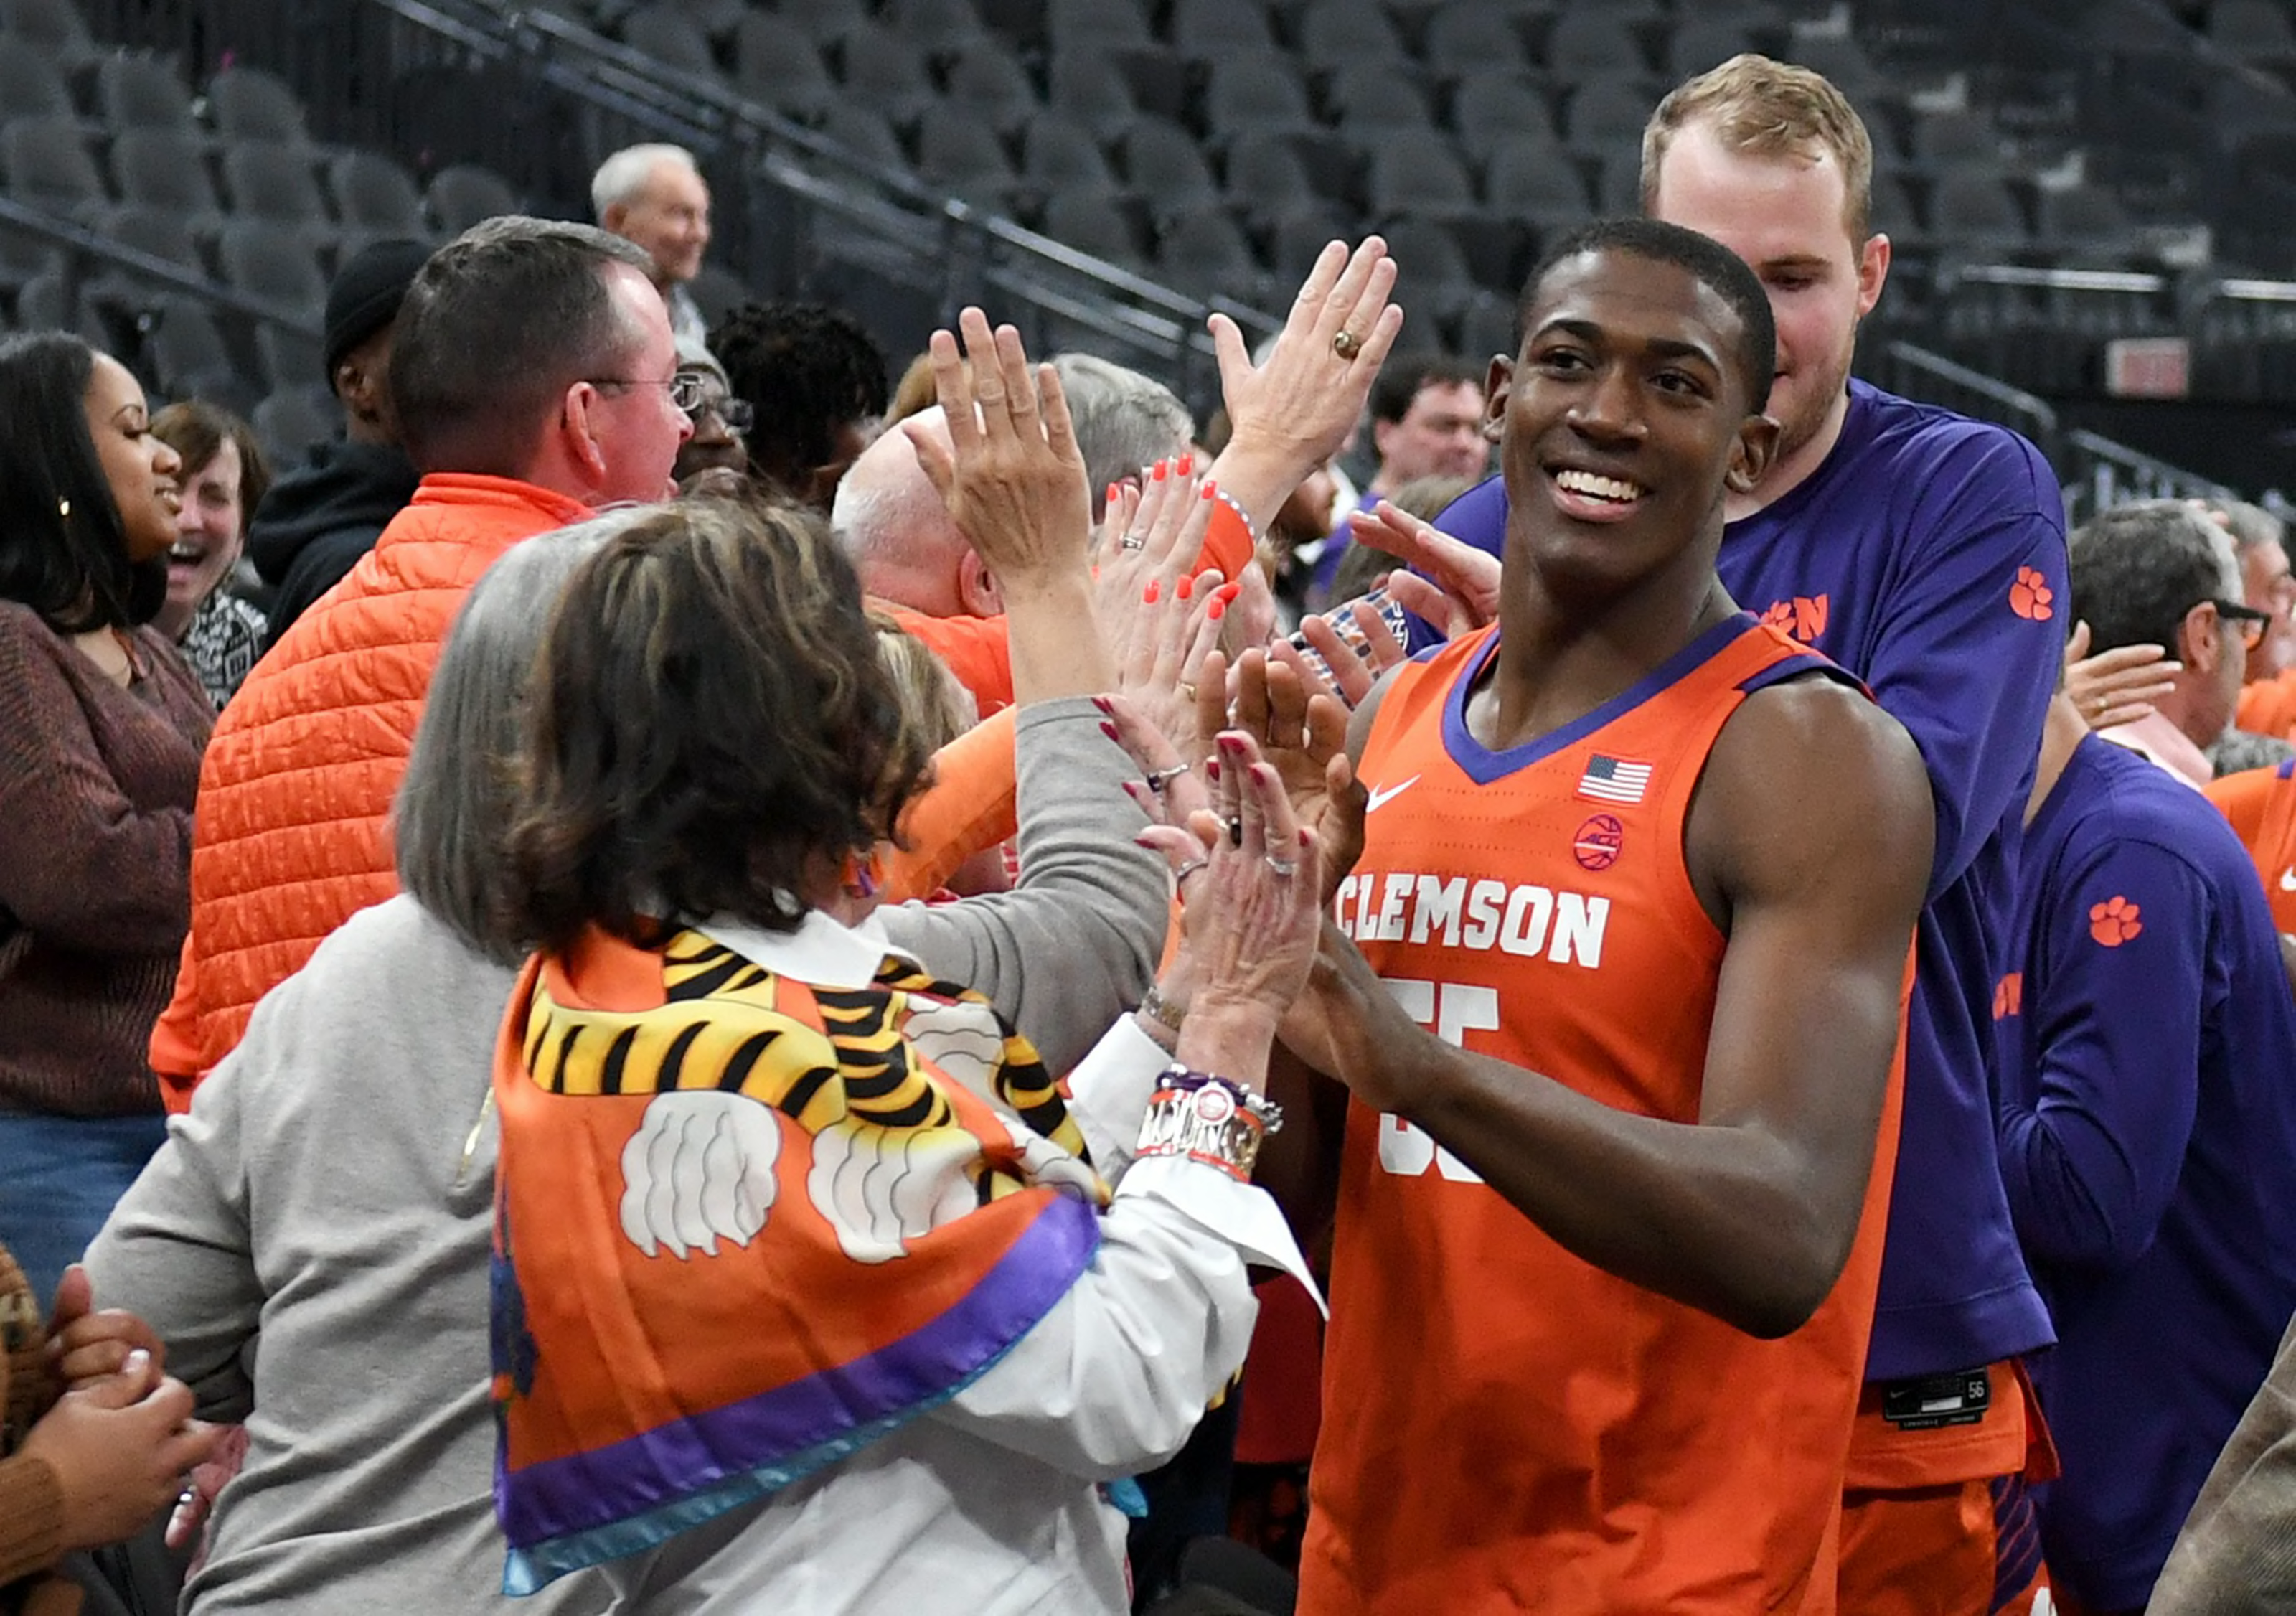 Clemson Basketball 202021 season preview for the Tigers